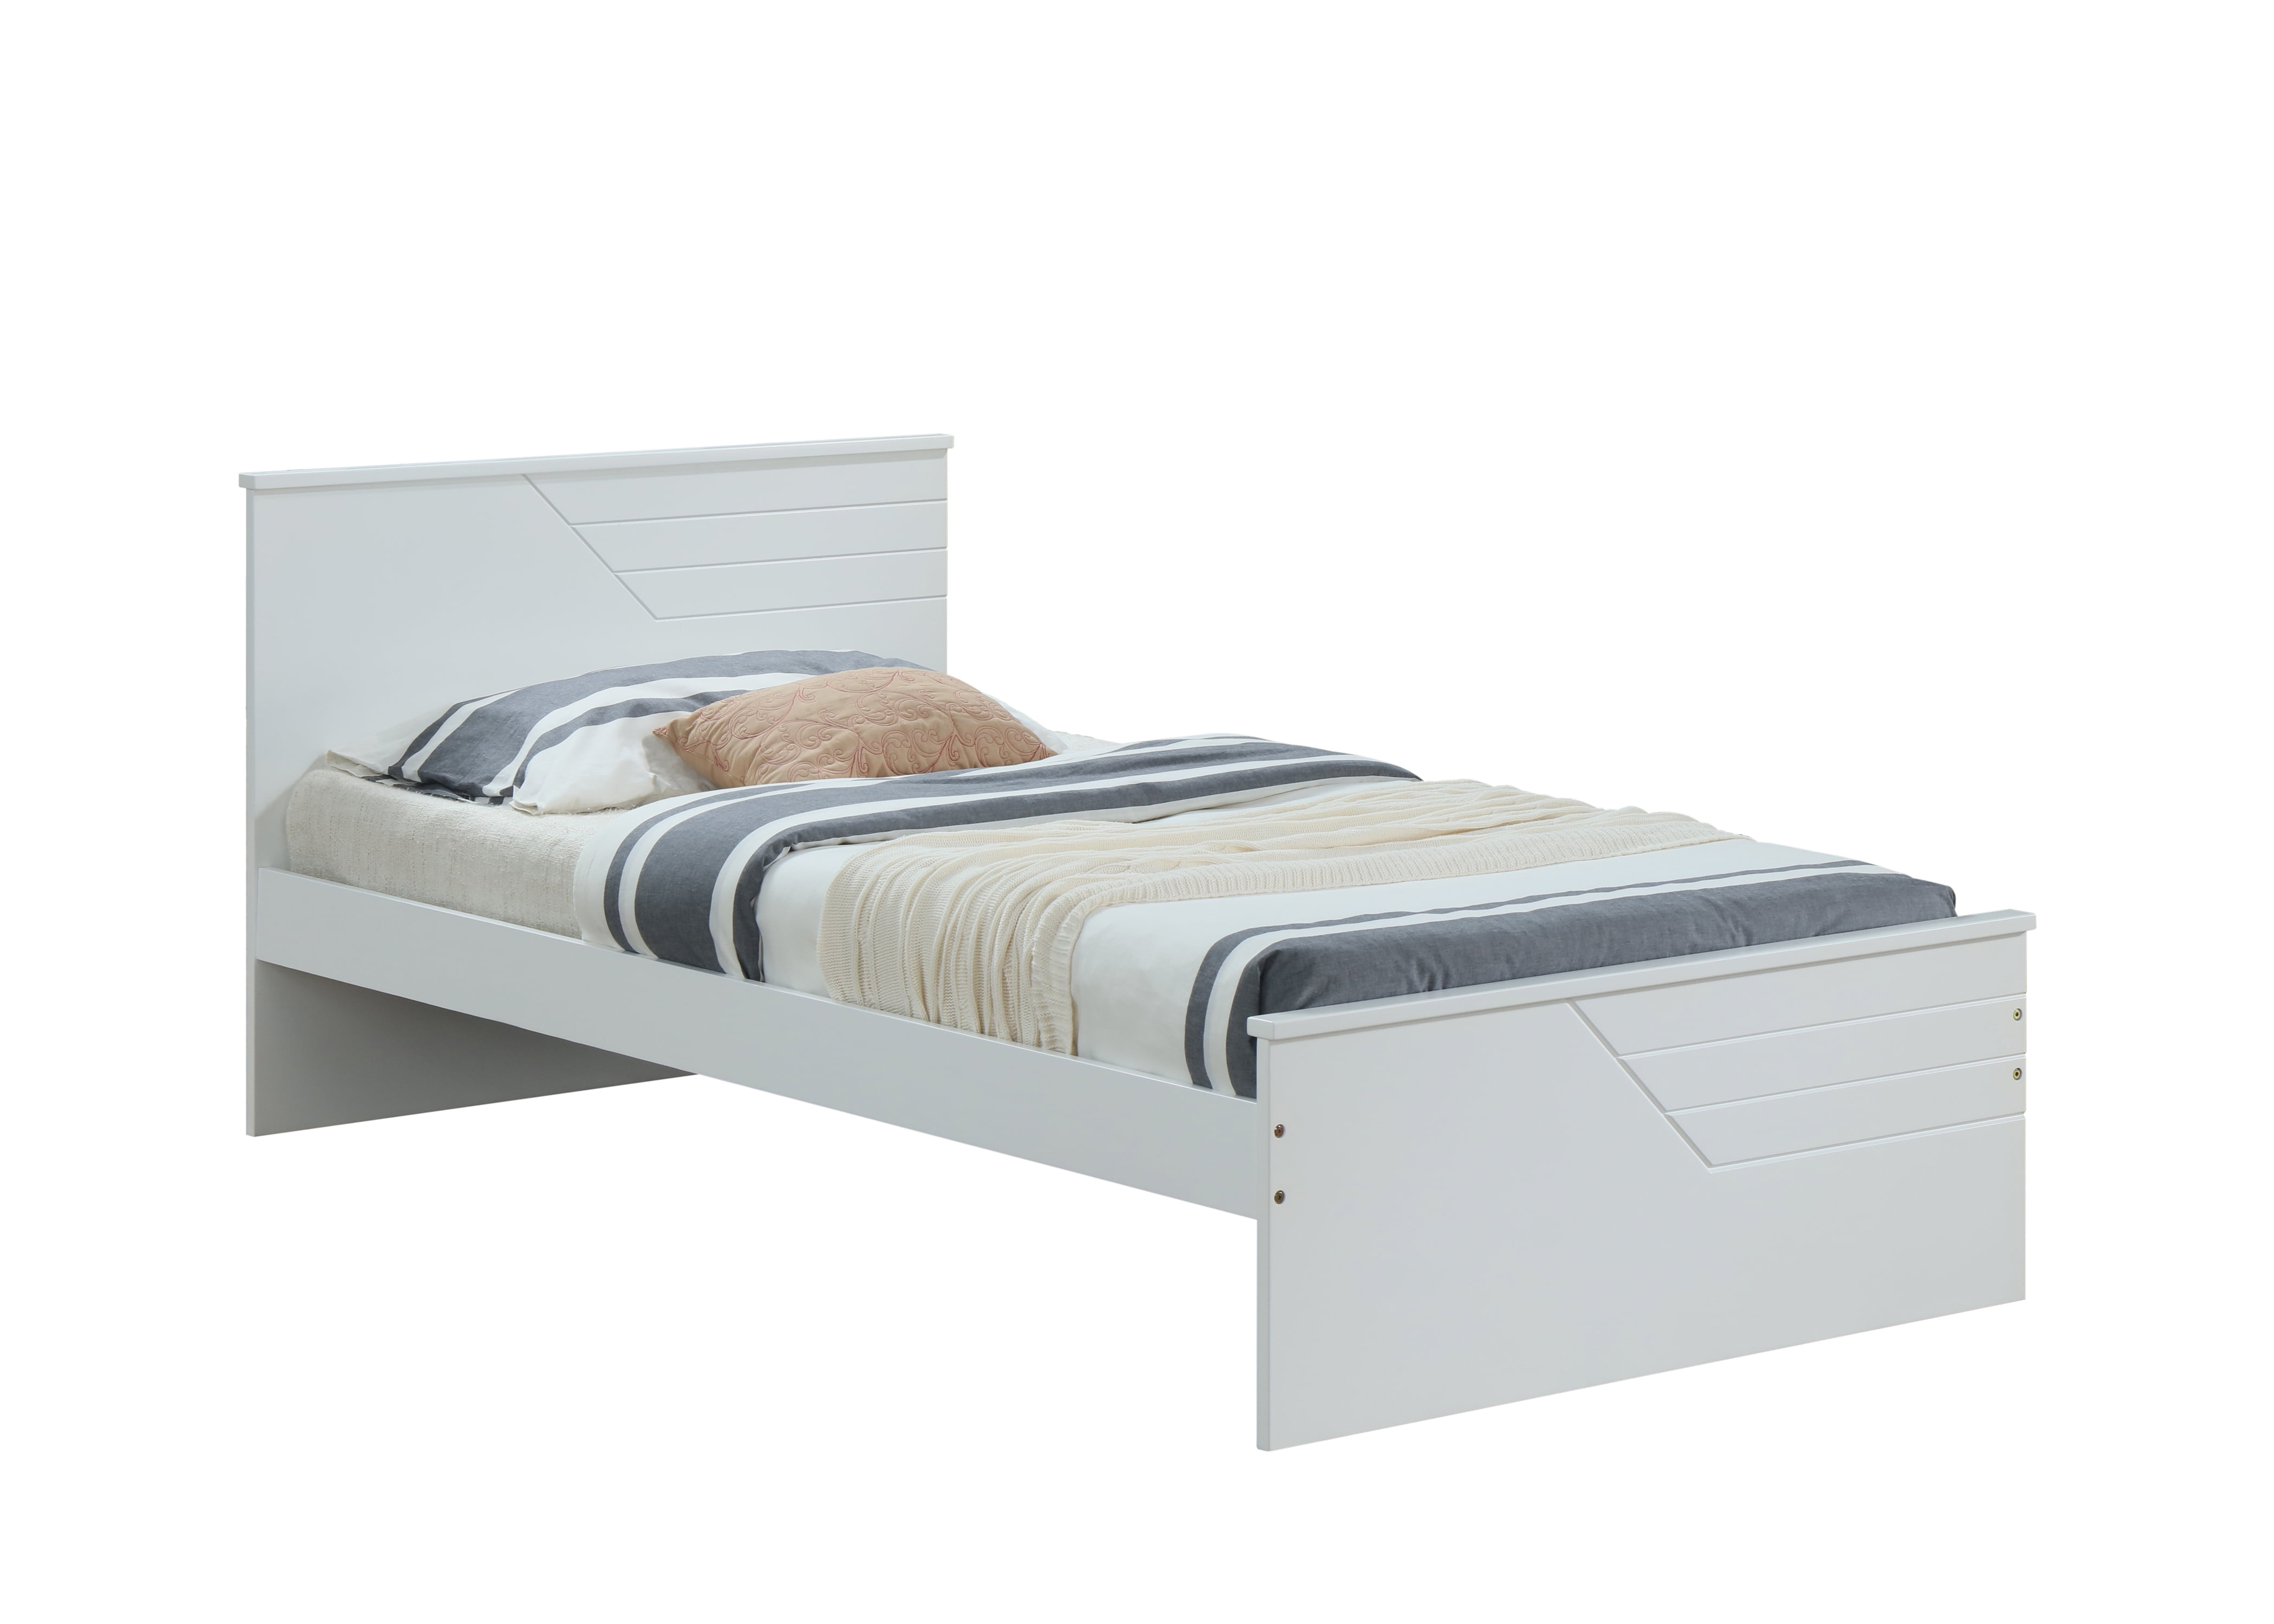 Picture of Acme Furniture 30770T 77 x 41 x 32 in. Ragna Bed, White - Twin Size - Case of 2